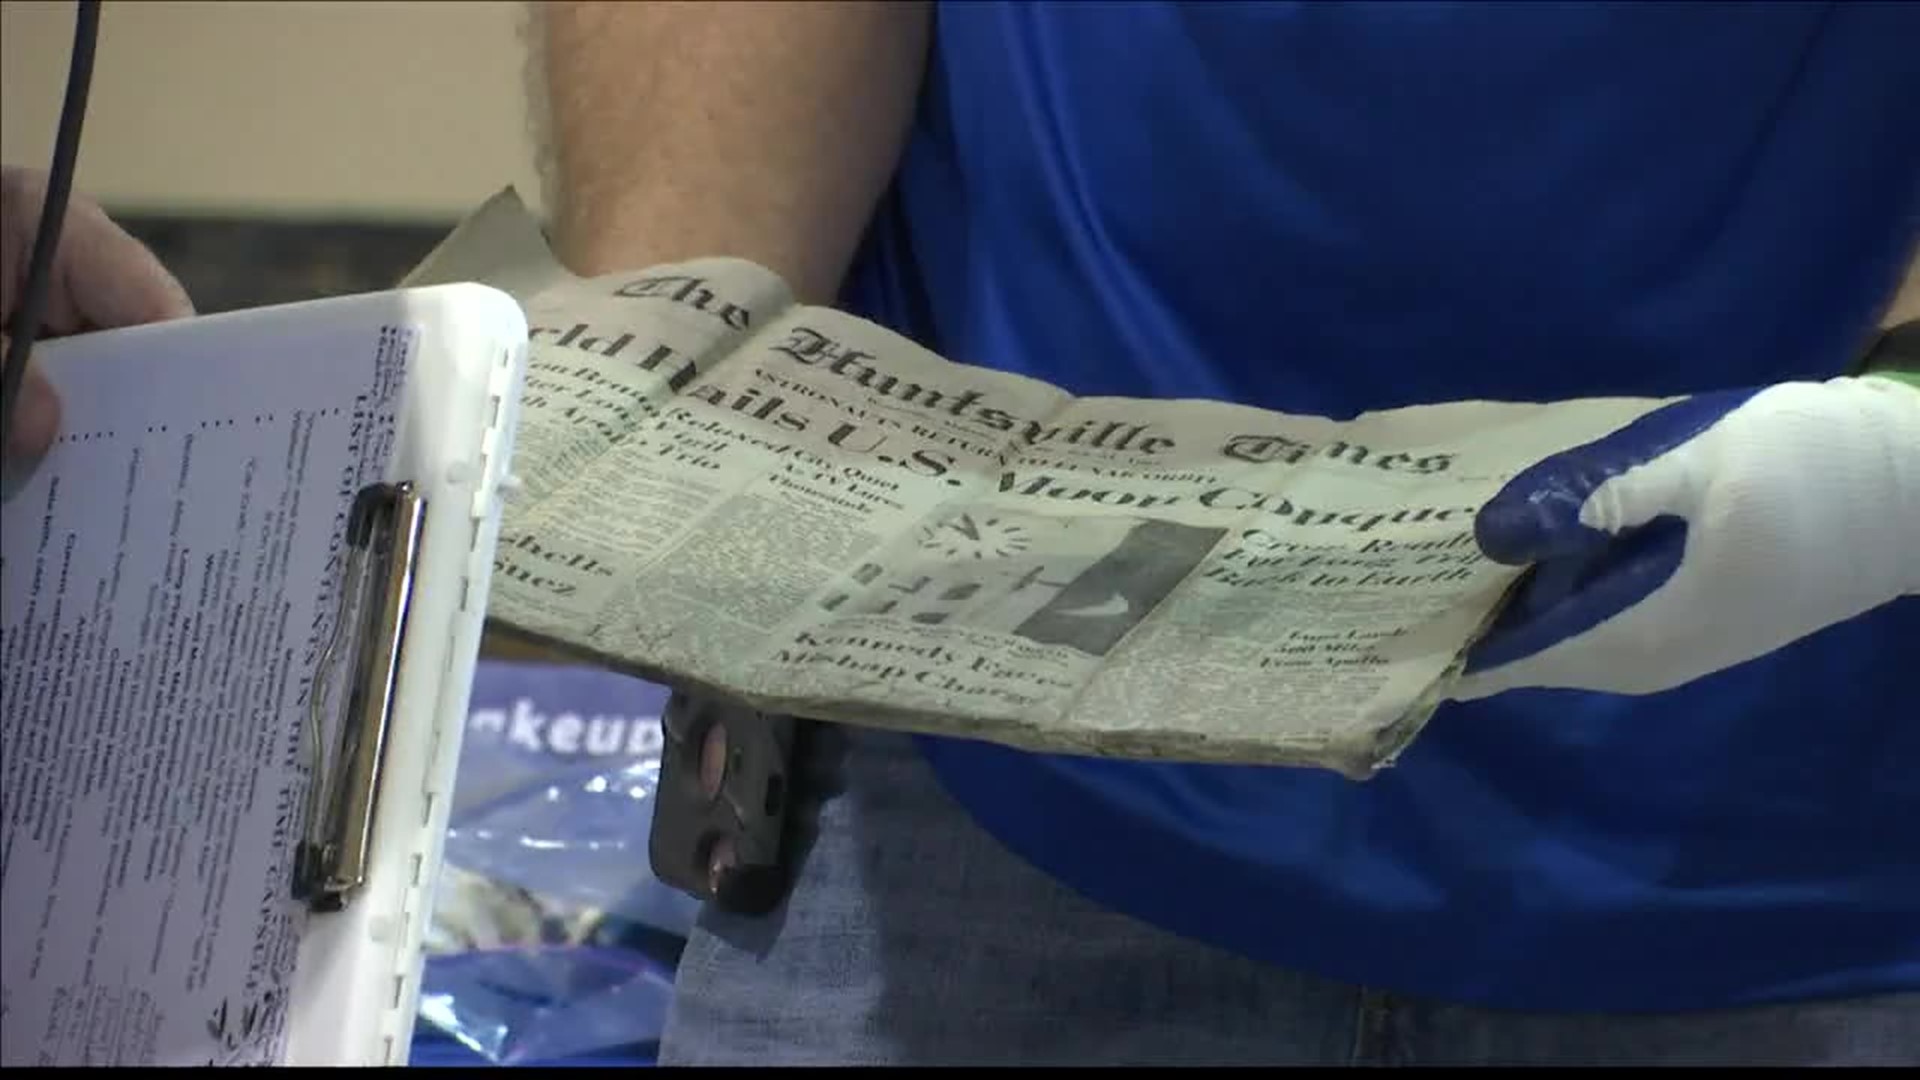 The City of Madison unveiled a time capsule that was buried 50 years ago at Madison Elementary.